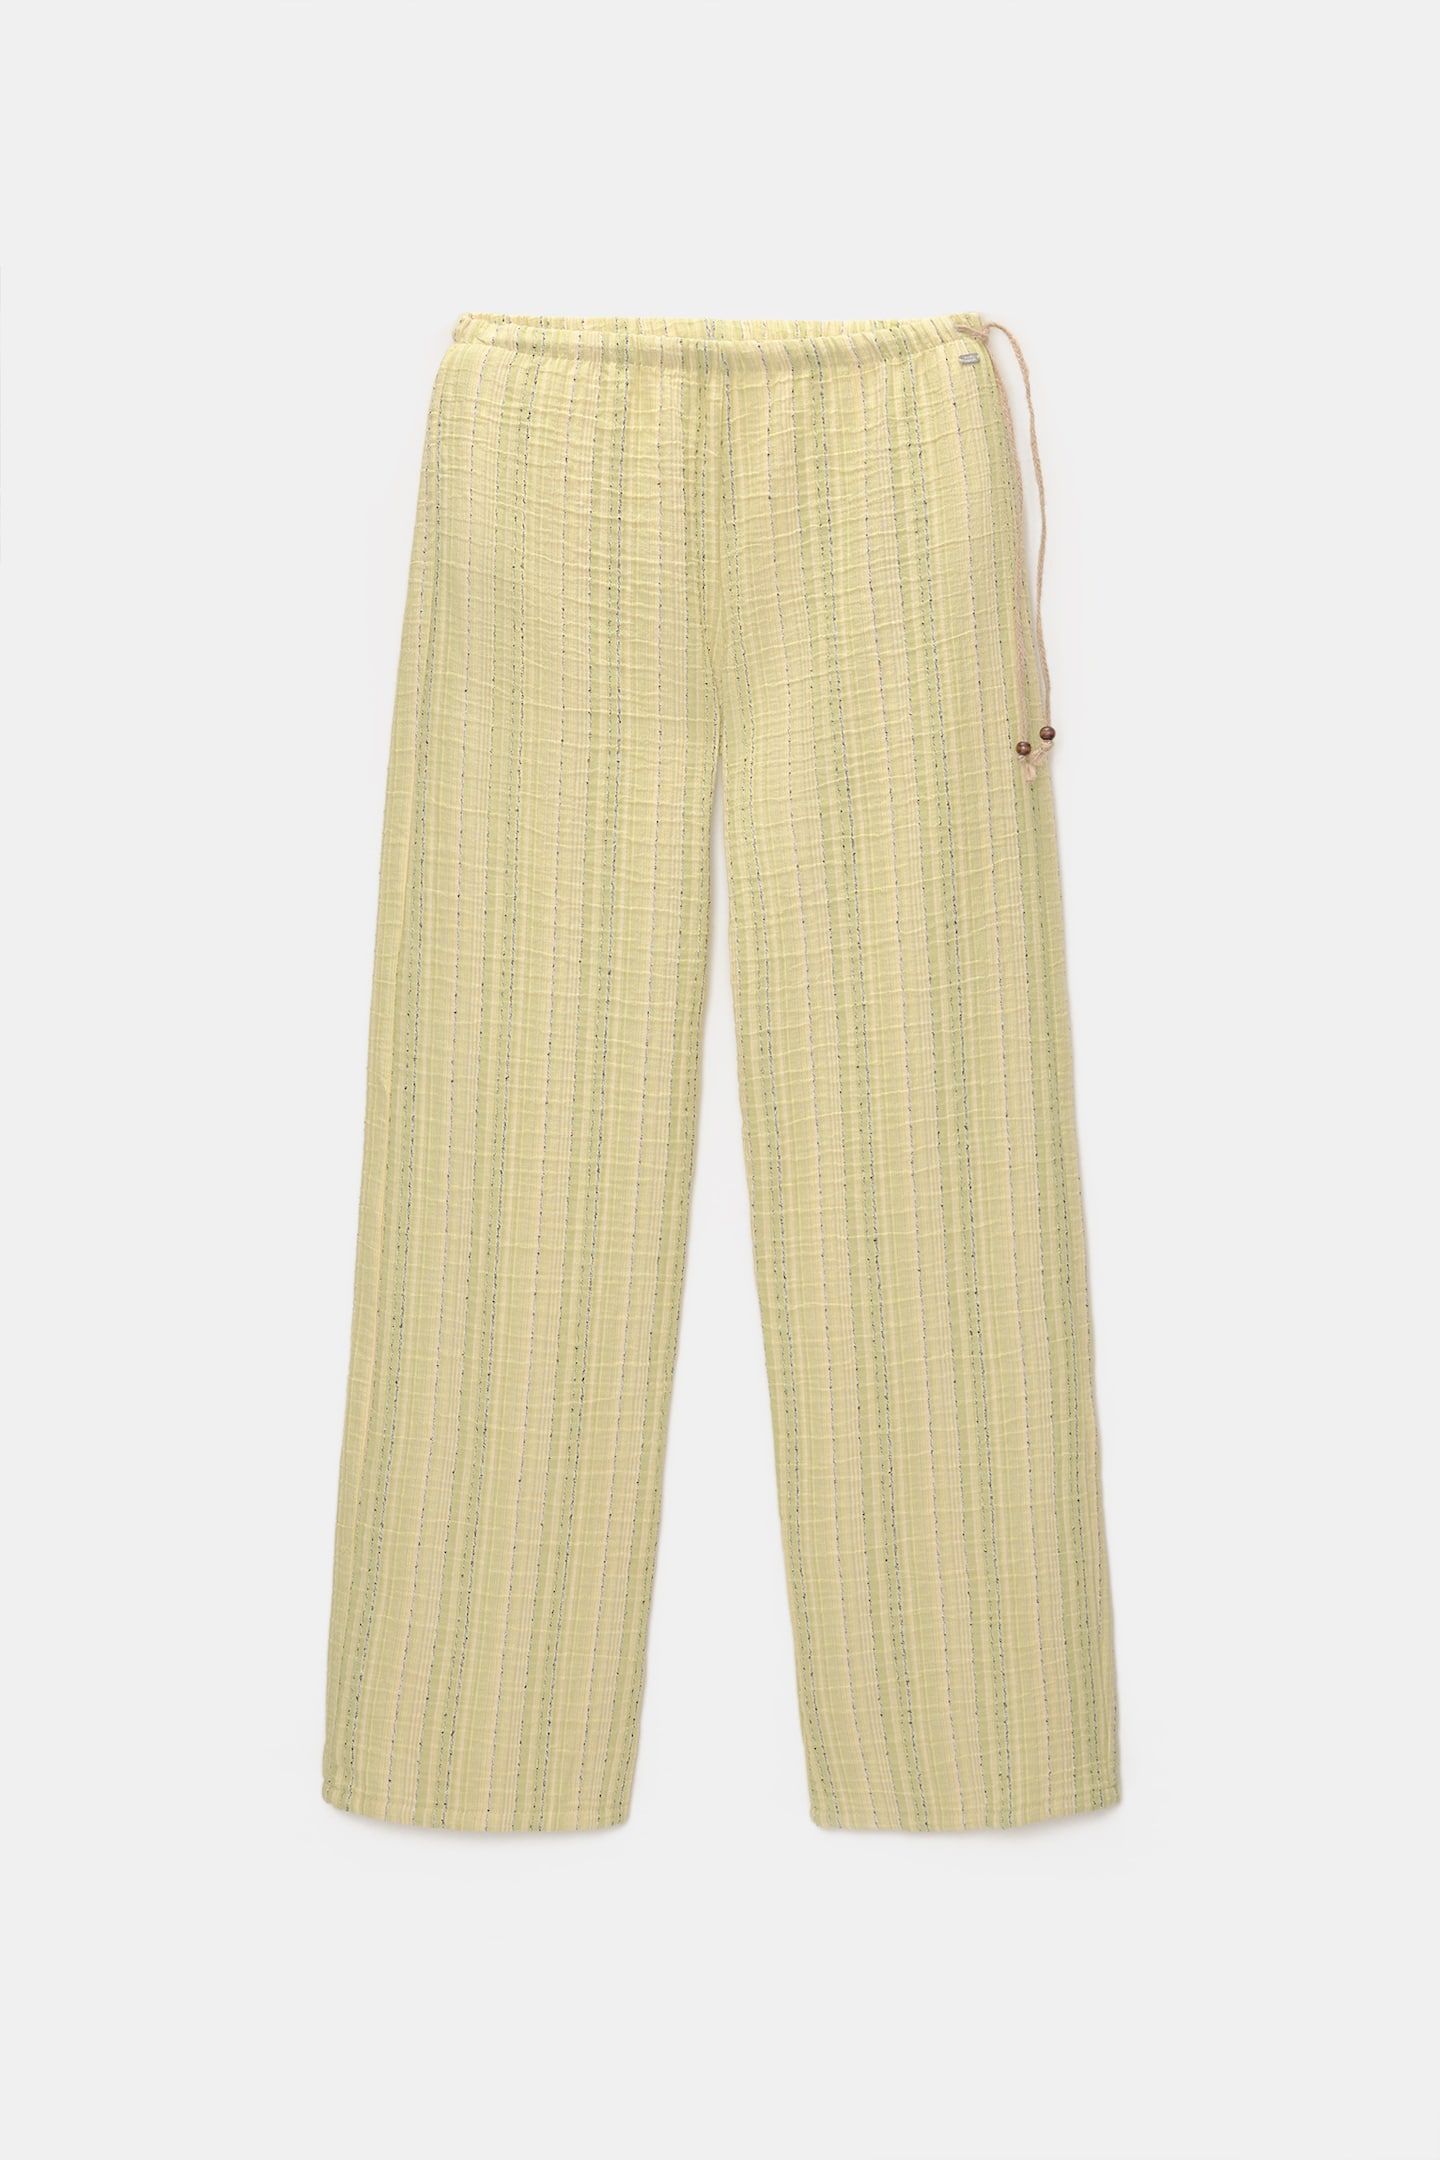 Striped rustic flowing trousers | PULL and BEAR UK